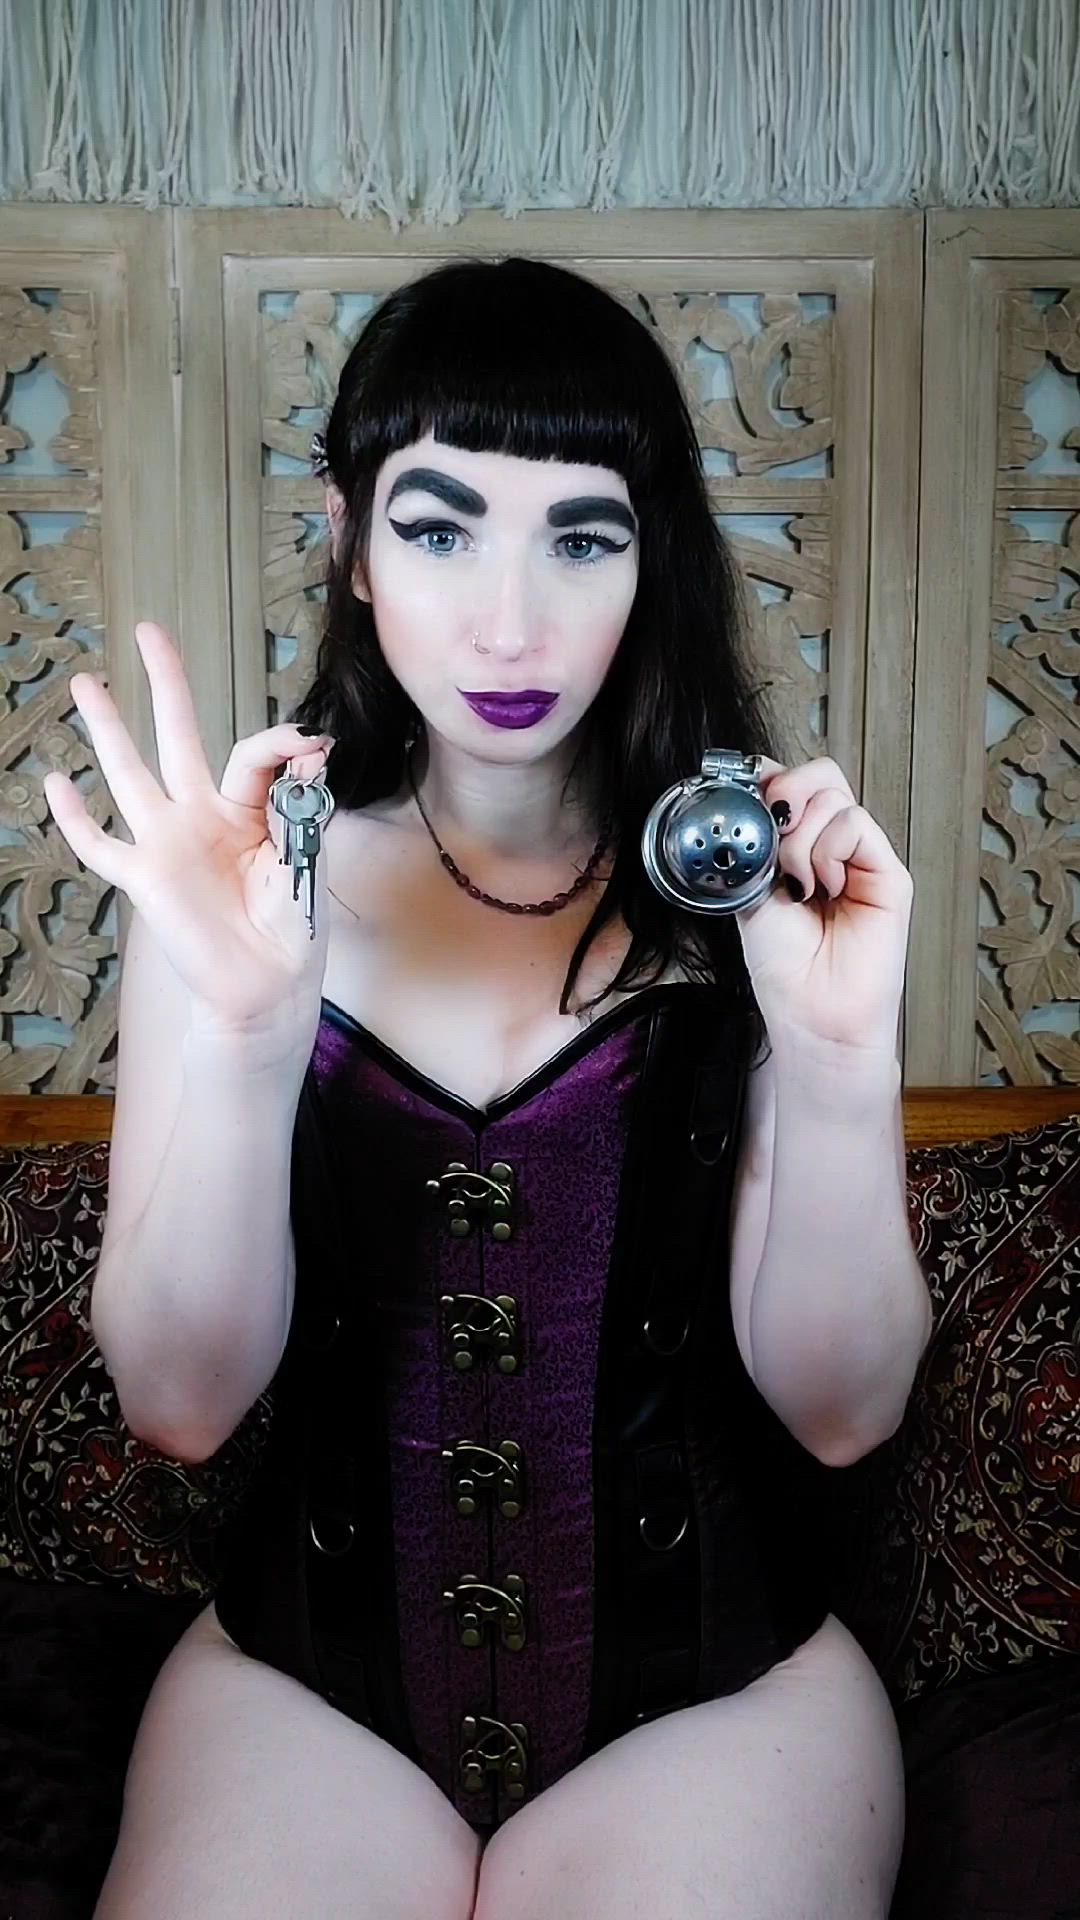 Corset porn video with onlyfans model ladystardust333 <strong>@ladystardust33</strong>